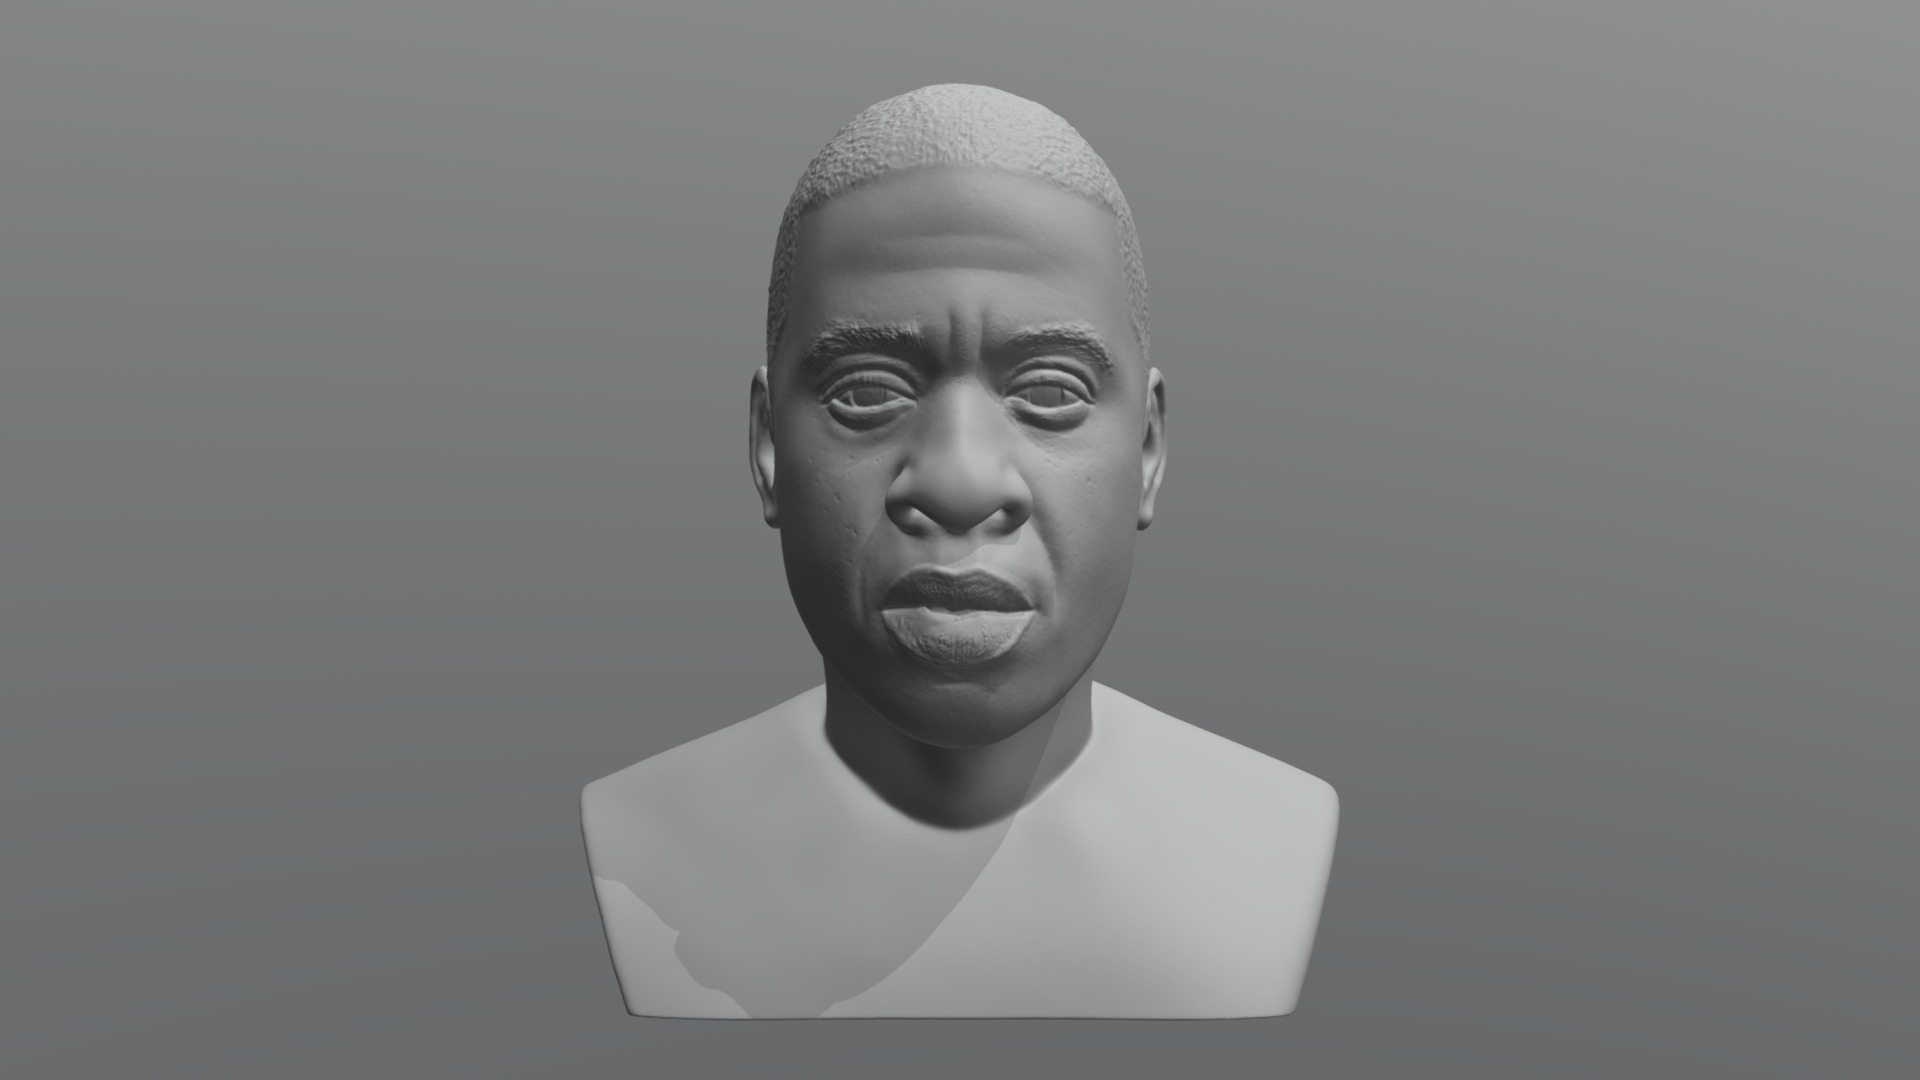 3D model Jay-Z bust for 3D printing - This is a 3D model of the Jay-Z bust for 3D printing. The 3D model is about a man with a white shirt.